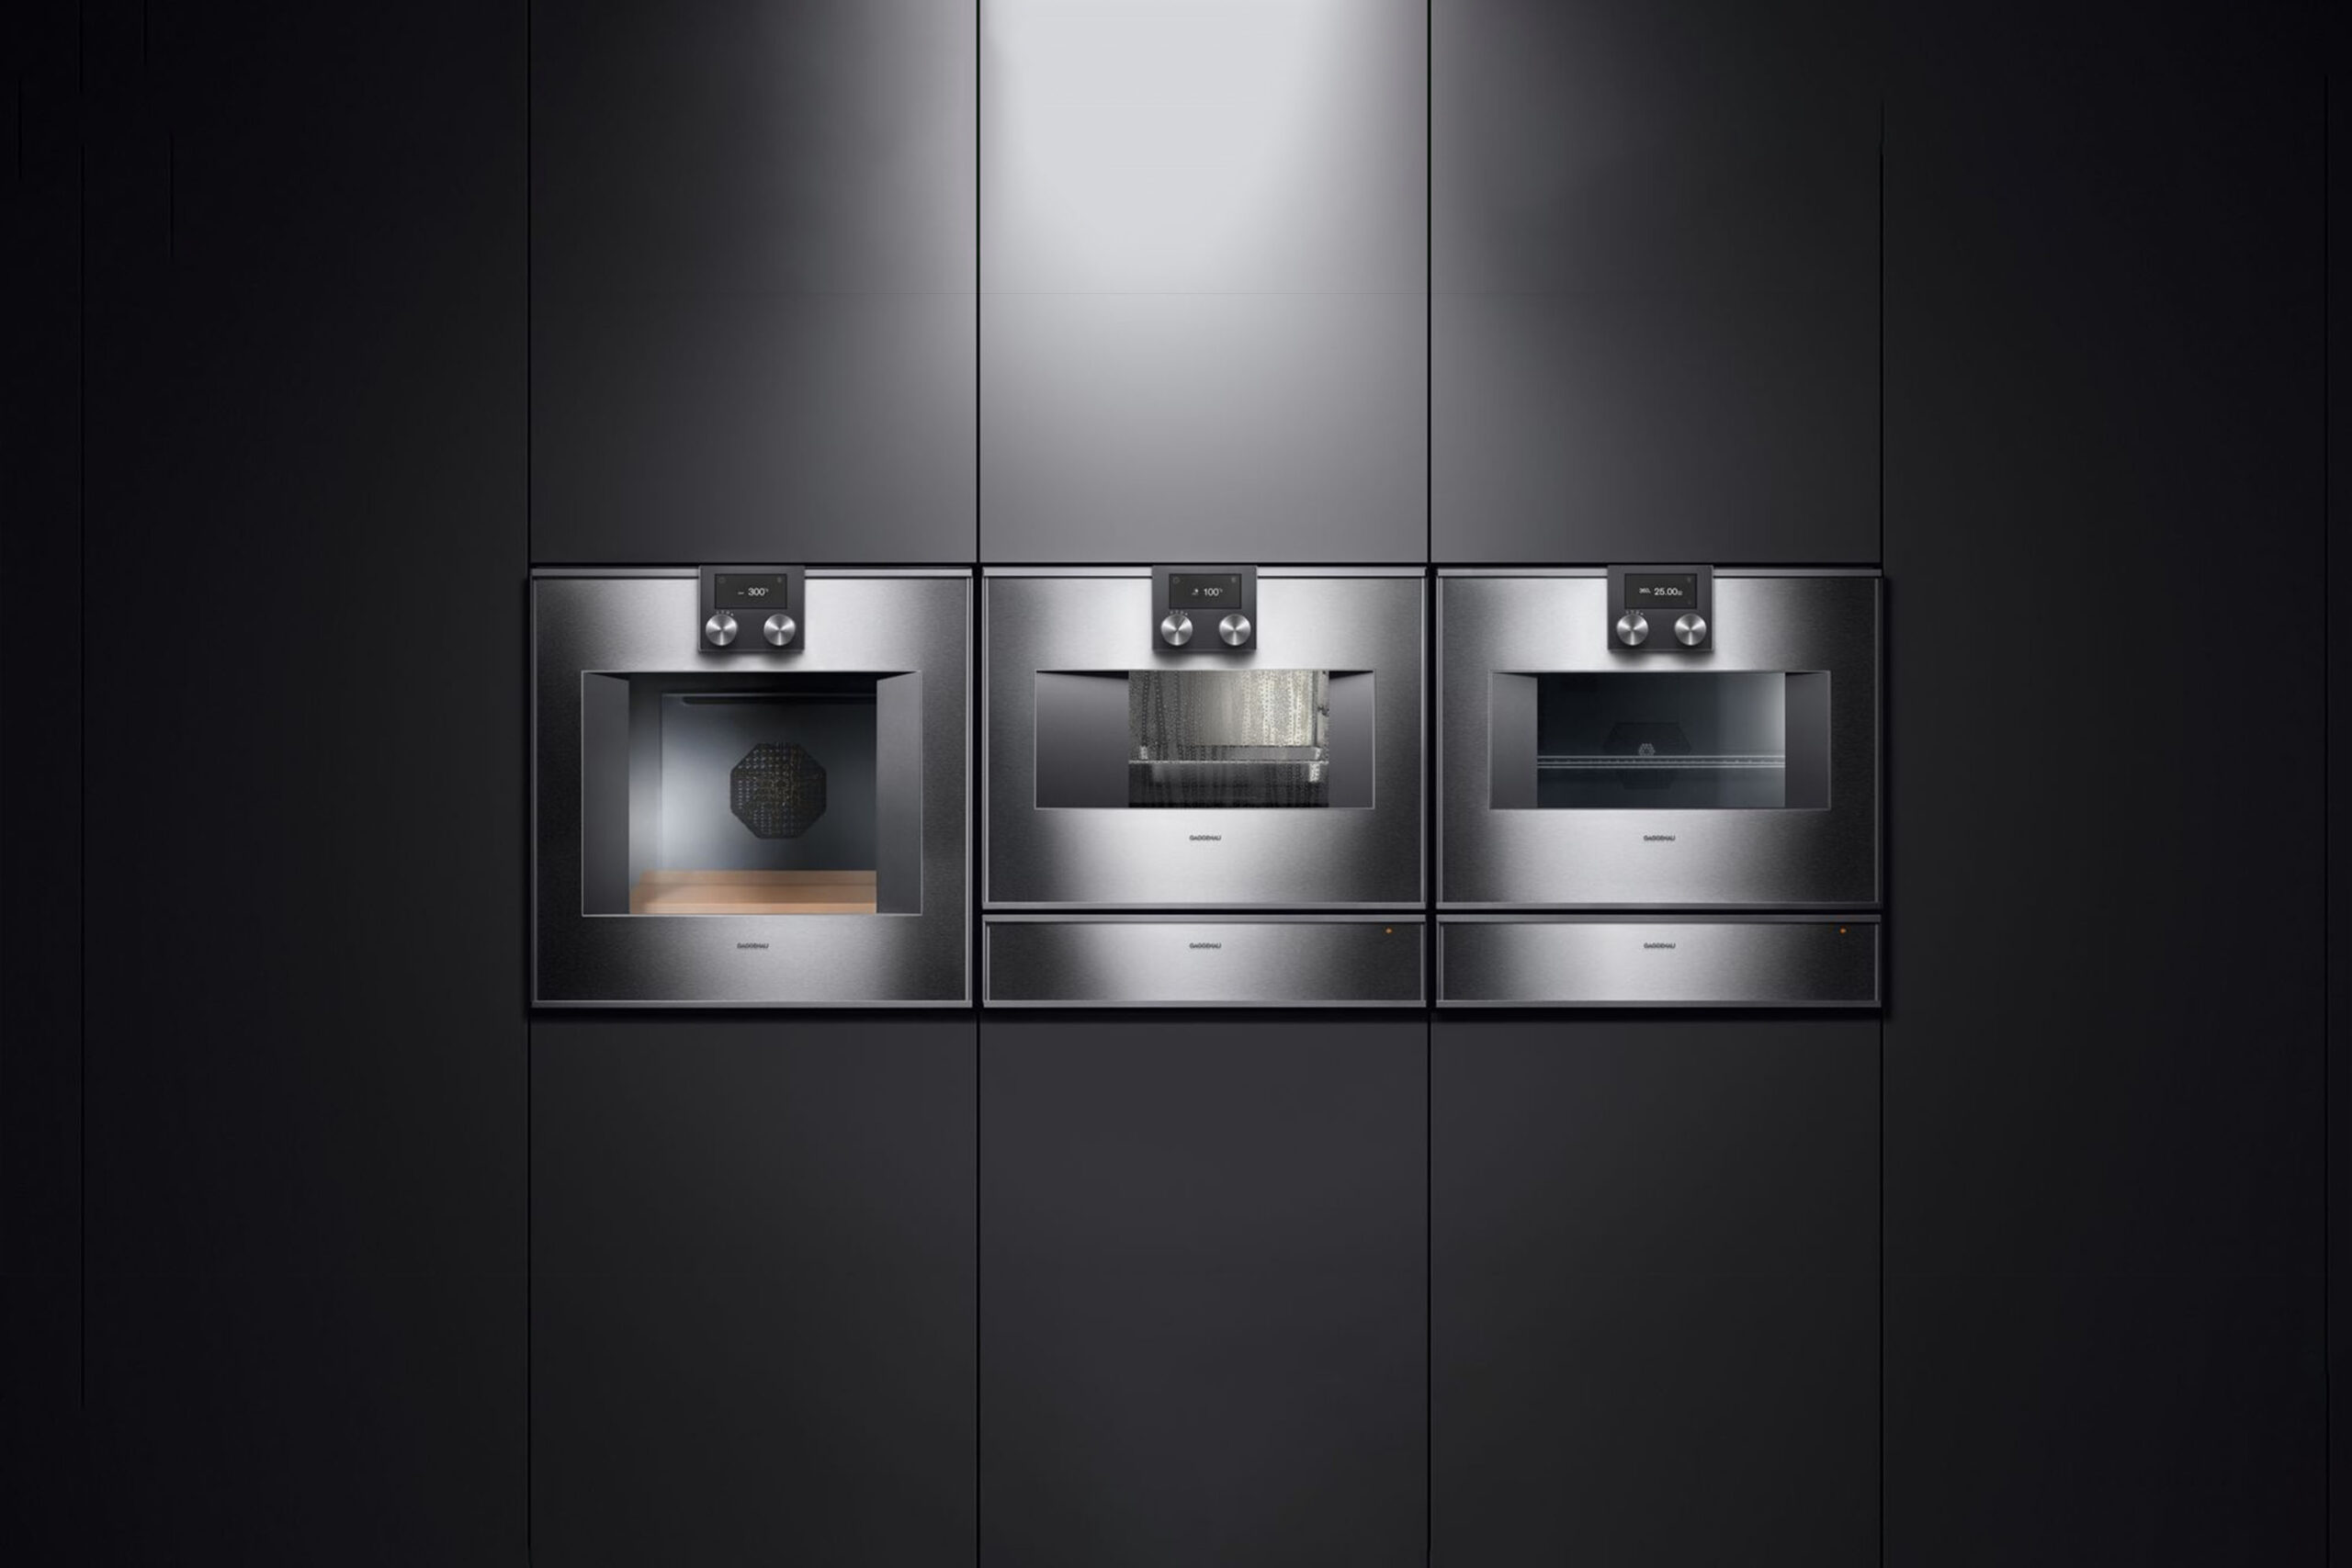 Luxury kitchen appliance brand Gaggenau 400 series combi-microwave oven. Buy in the UK with Krieder.